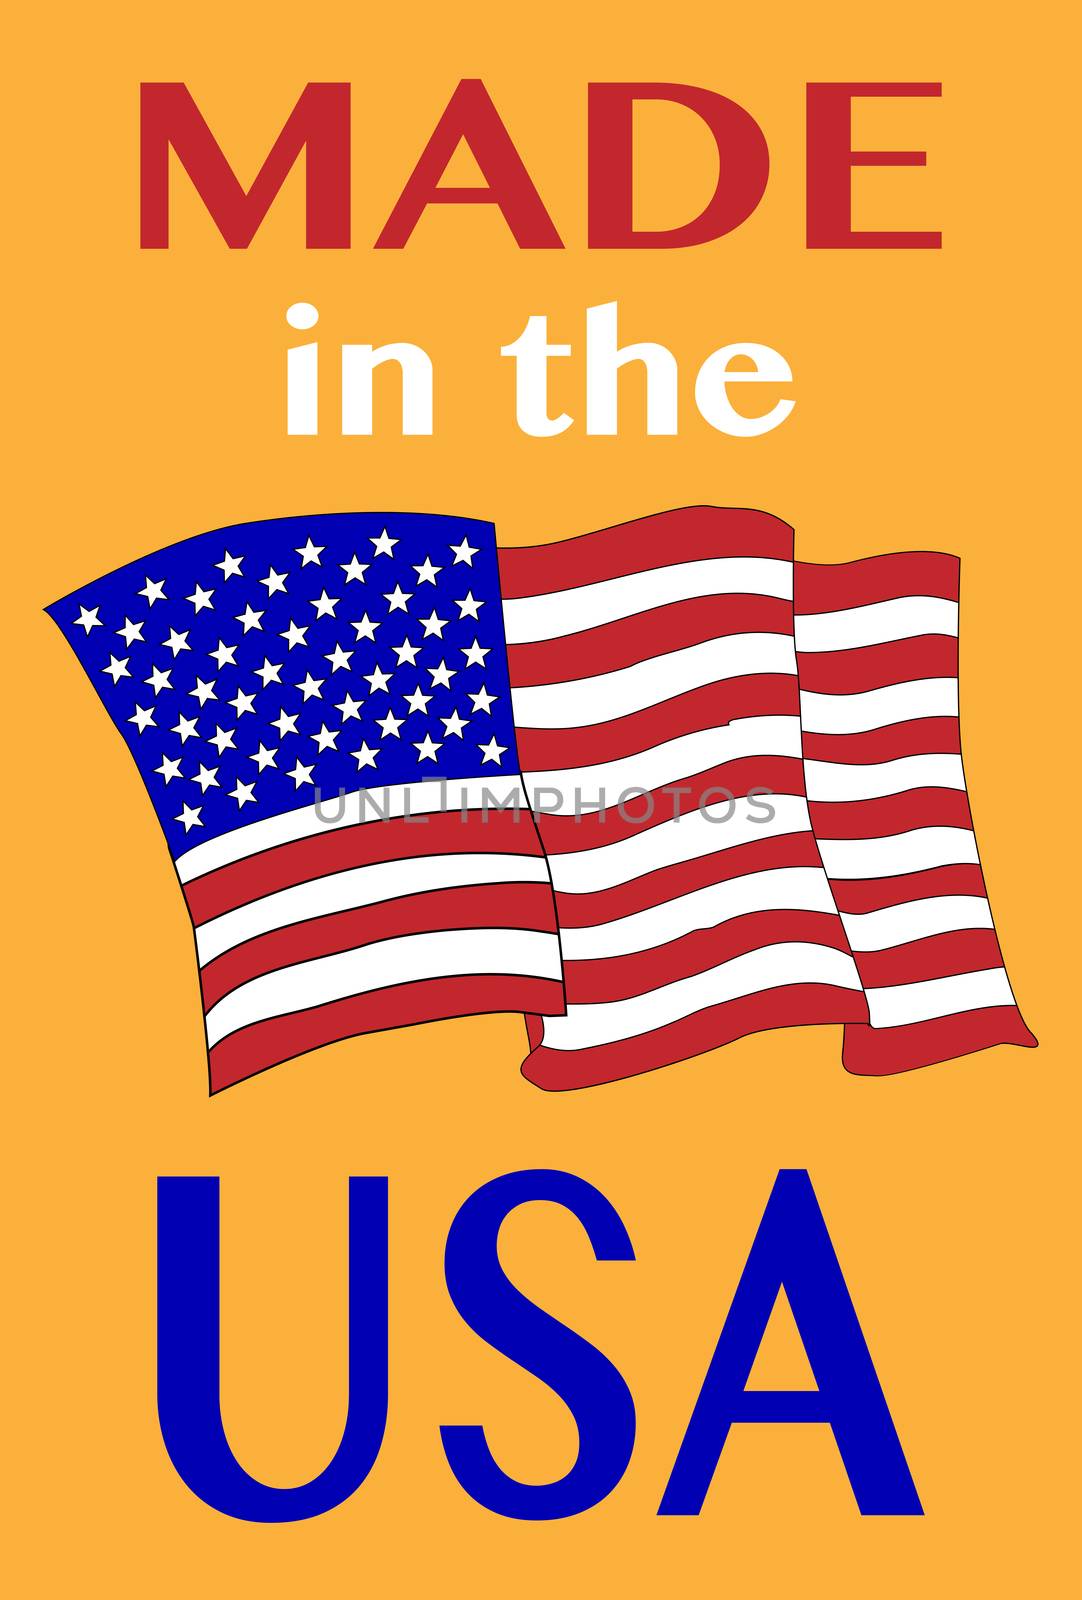 Made in the USA badge with waving flag